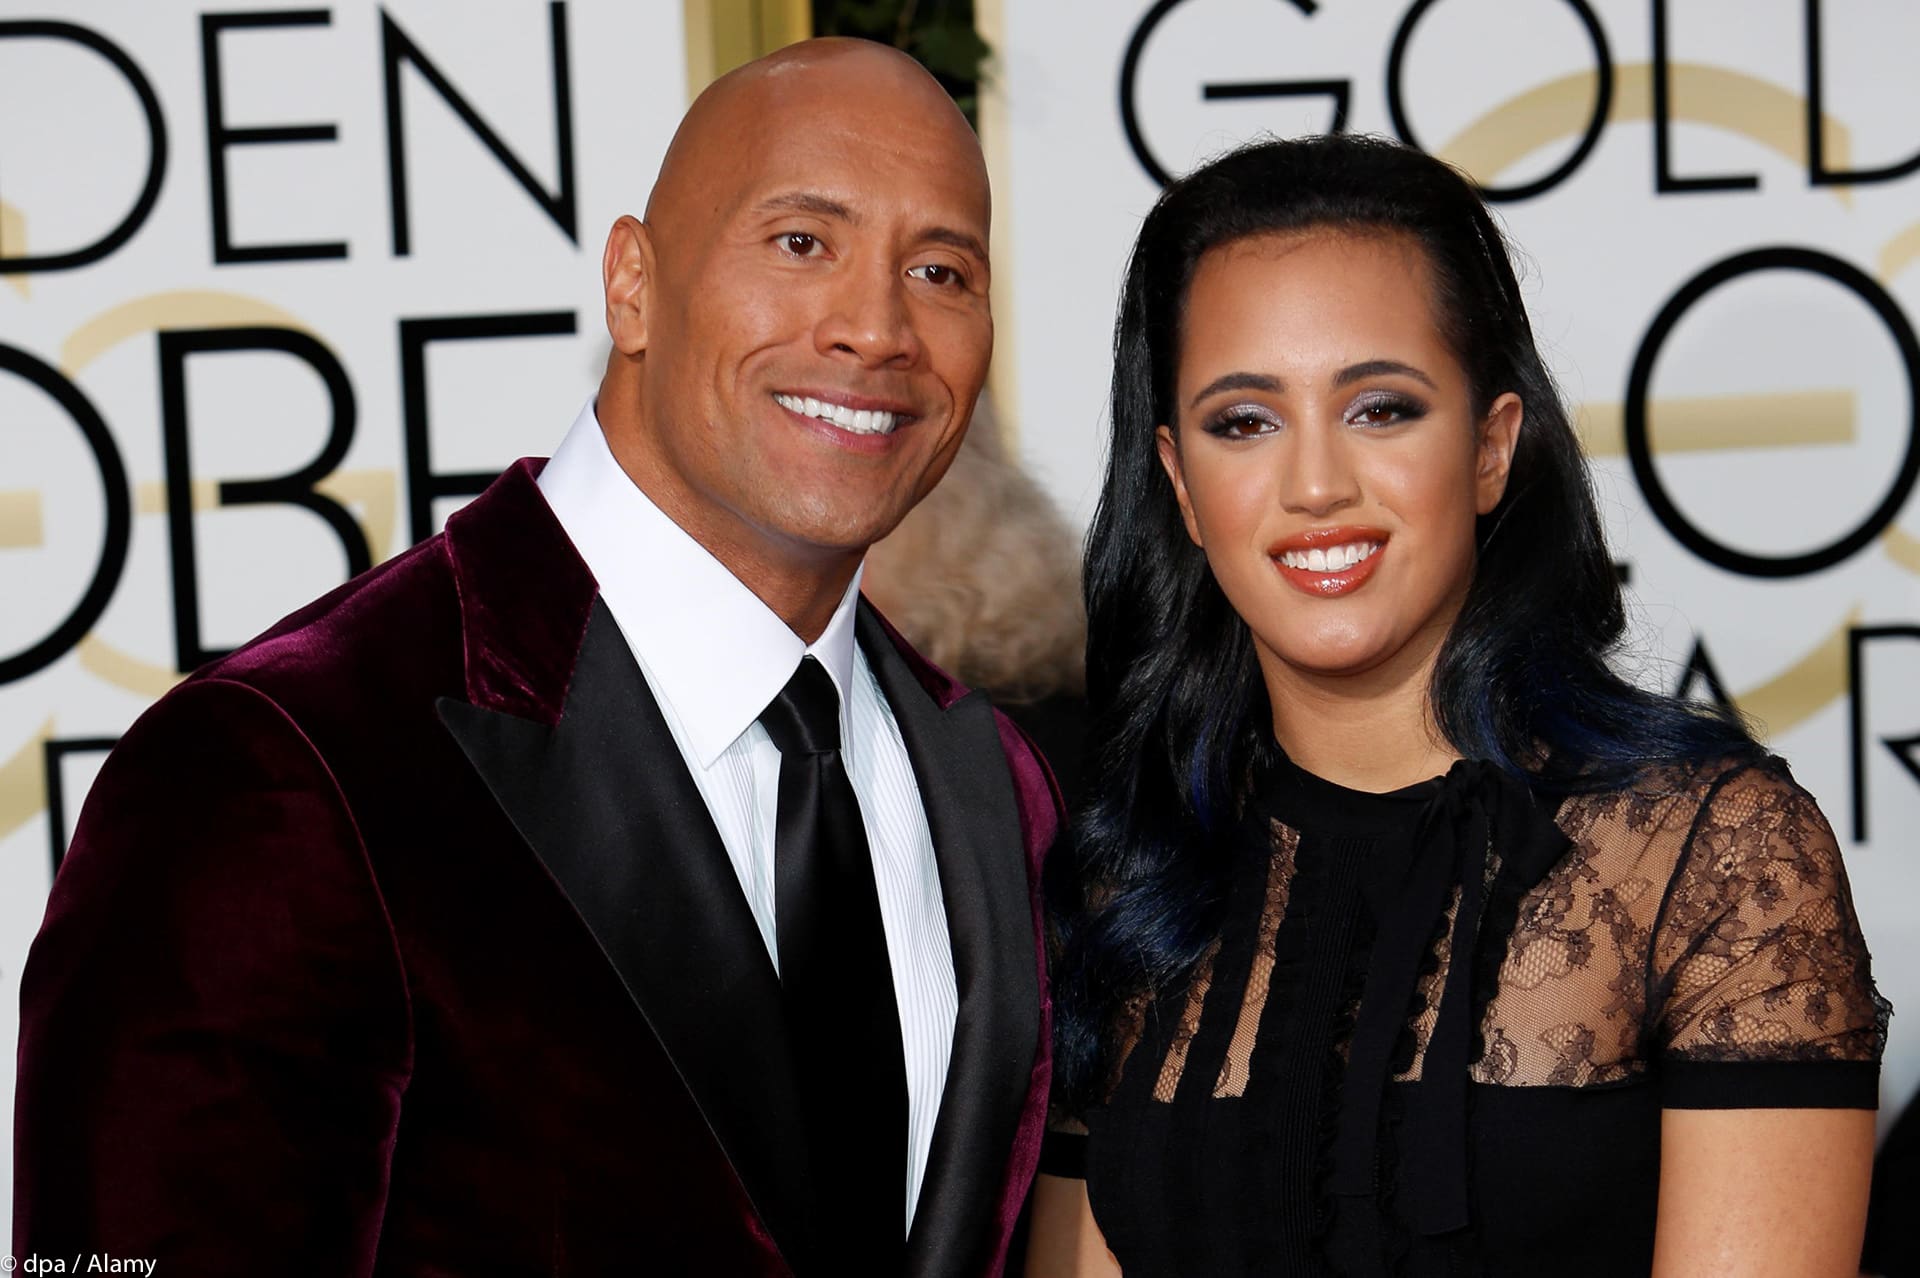 ”dwayne-the-rock-johnsons-daughter-is-one-step-closer-to-an-in-ring-debut”